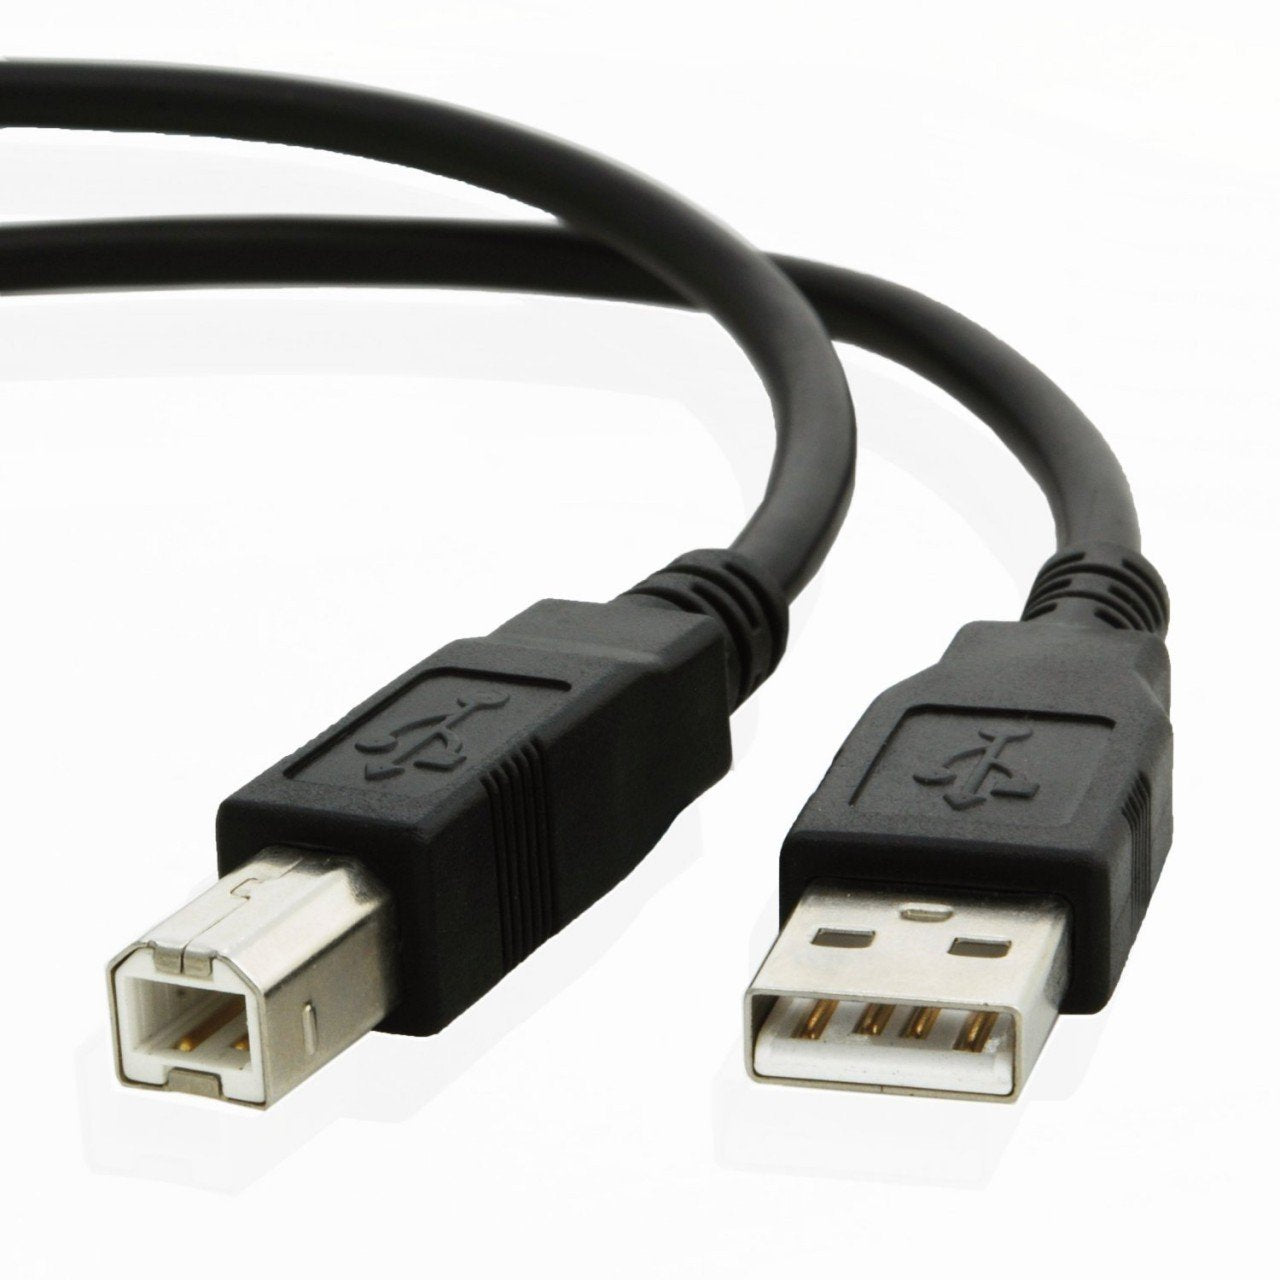 USB cable for Canon PIXMA TS6020